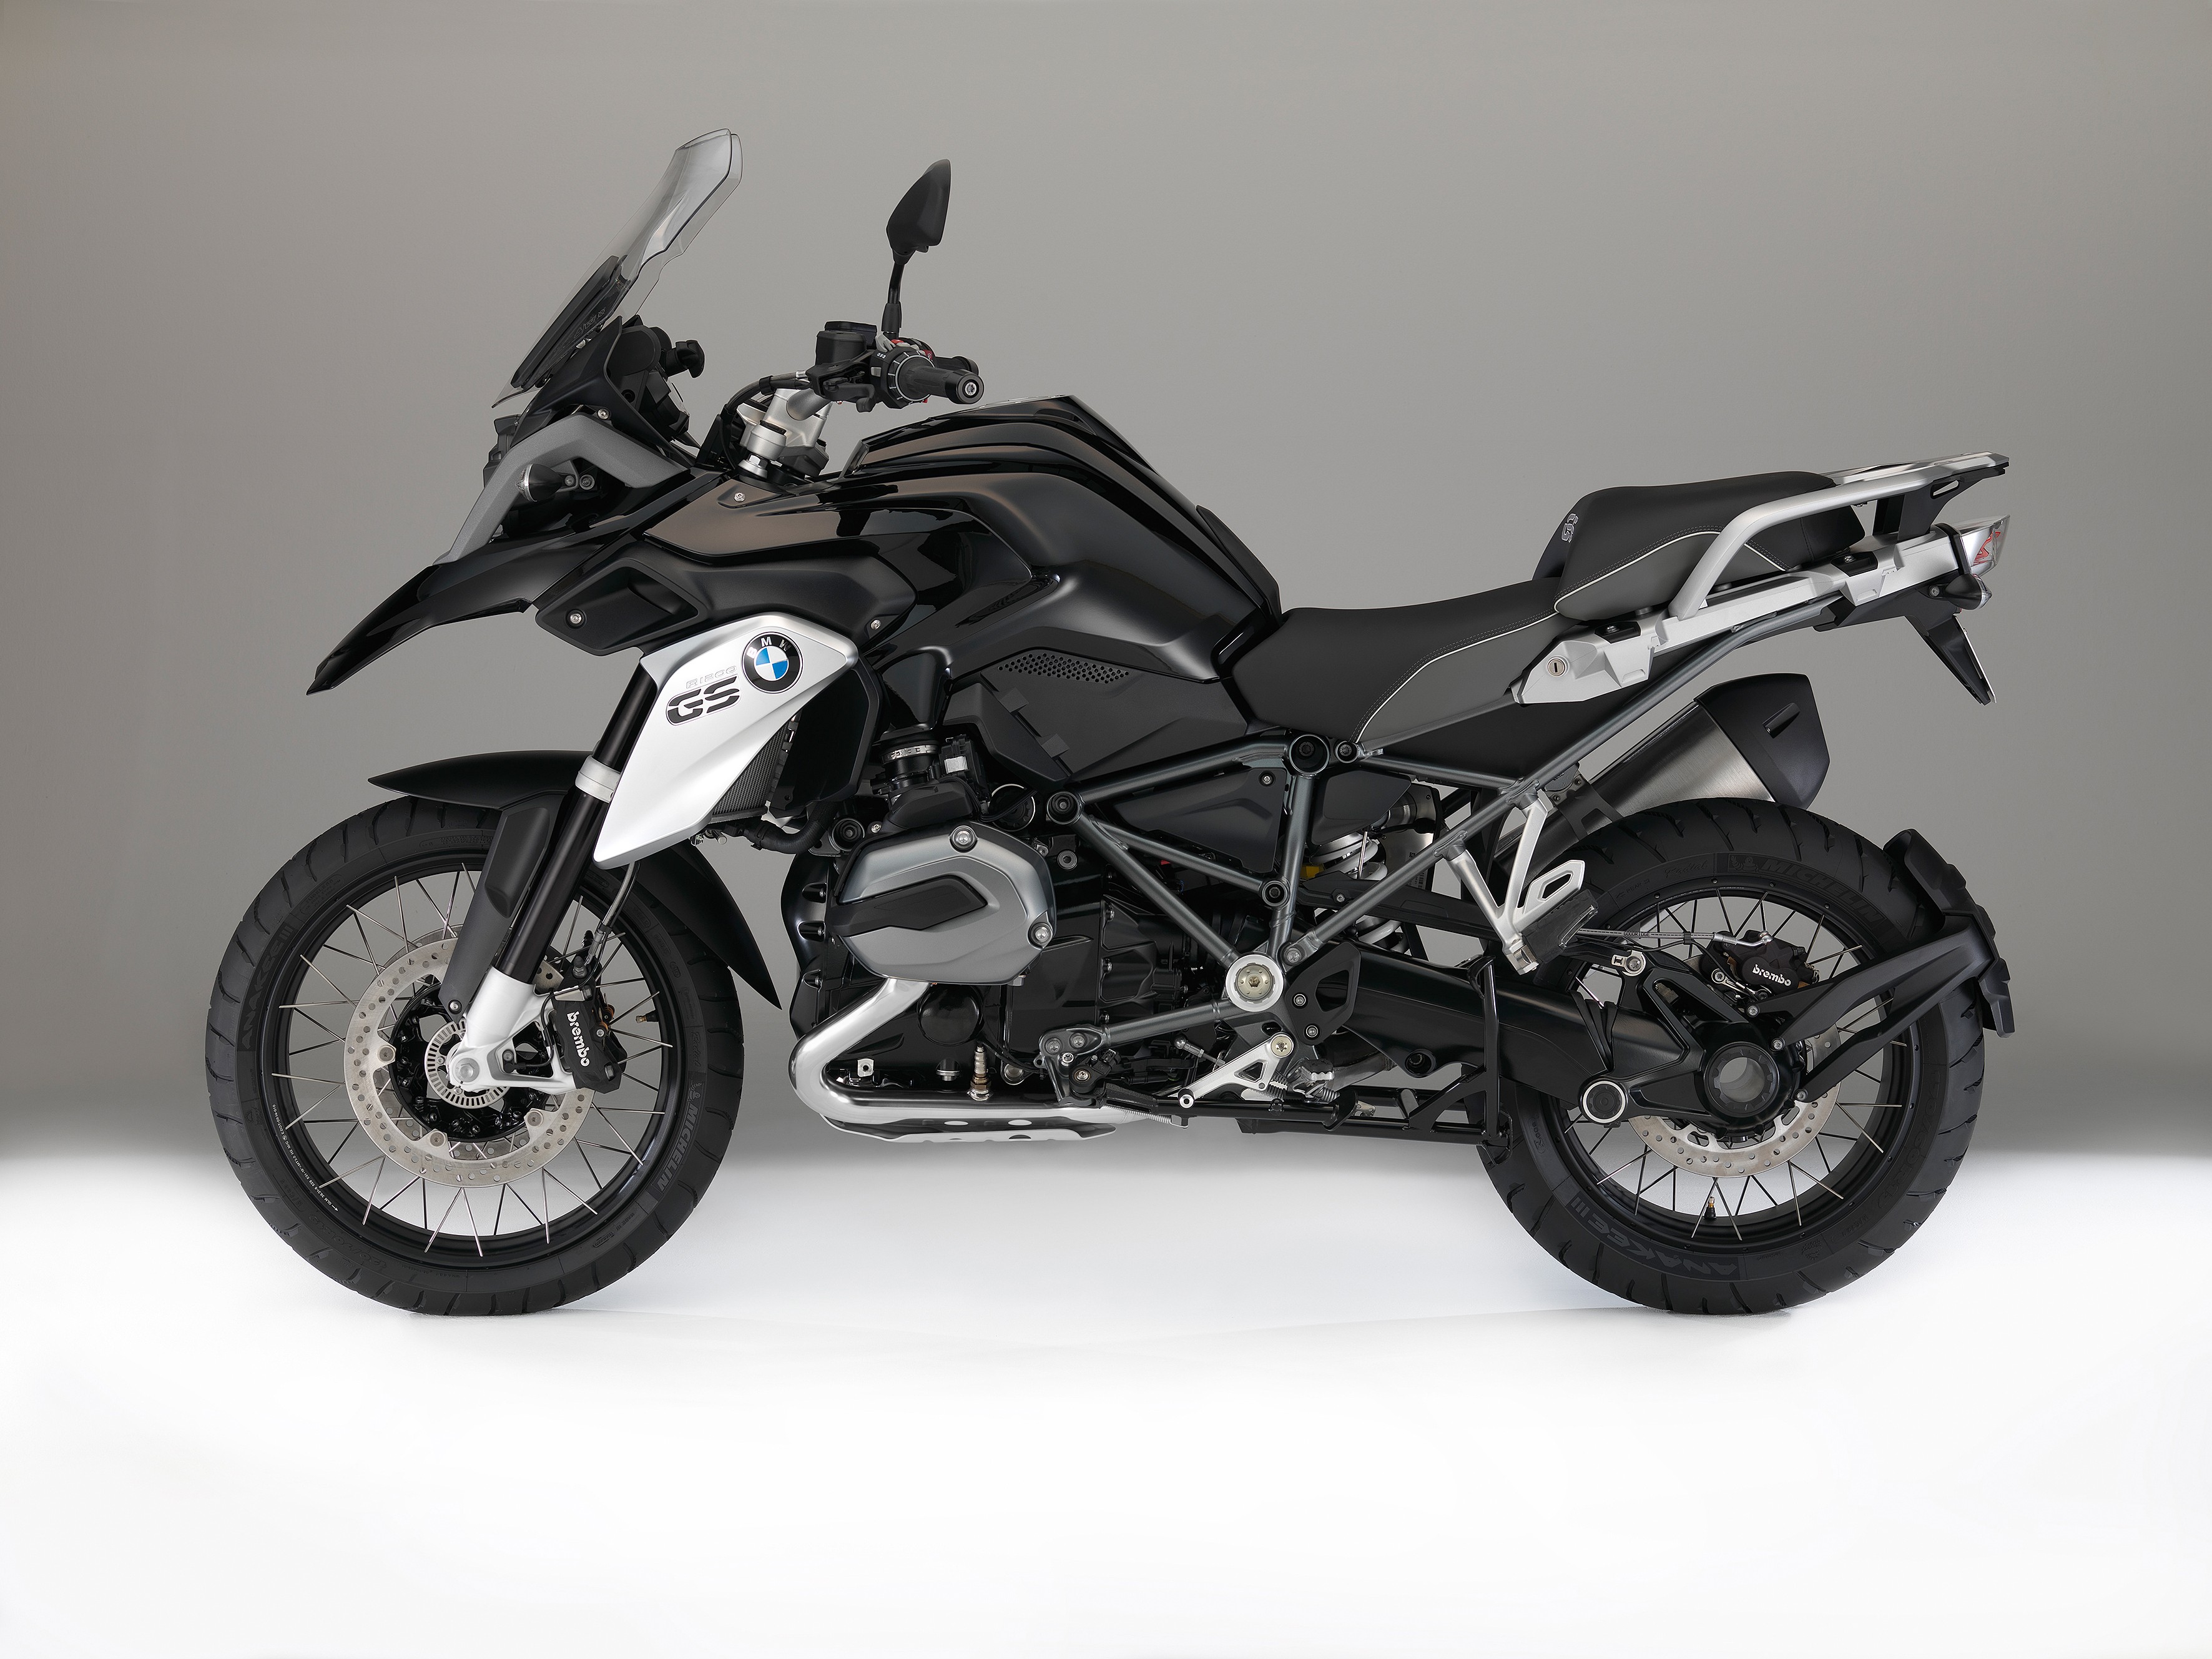 HQ BMW R1200GS Wallpapers | File 1233.03Kb